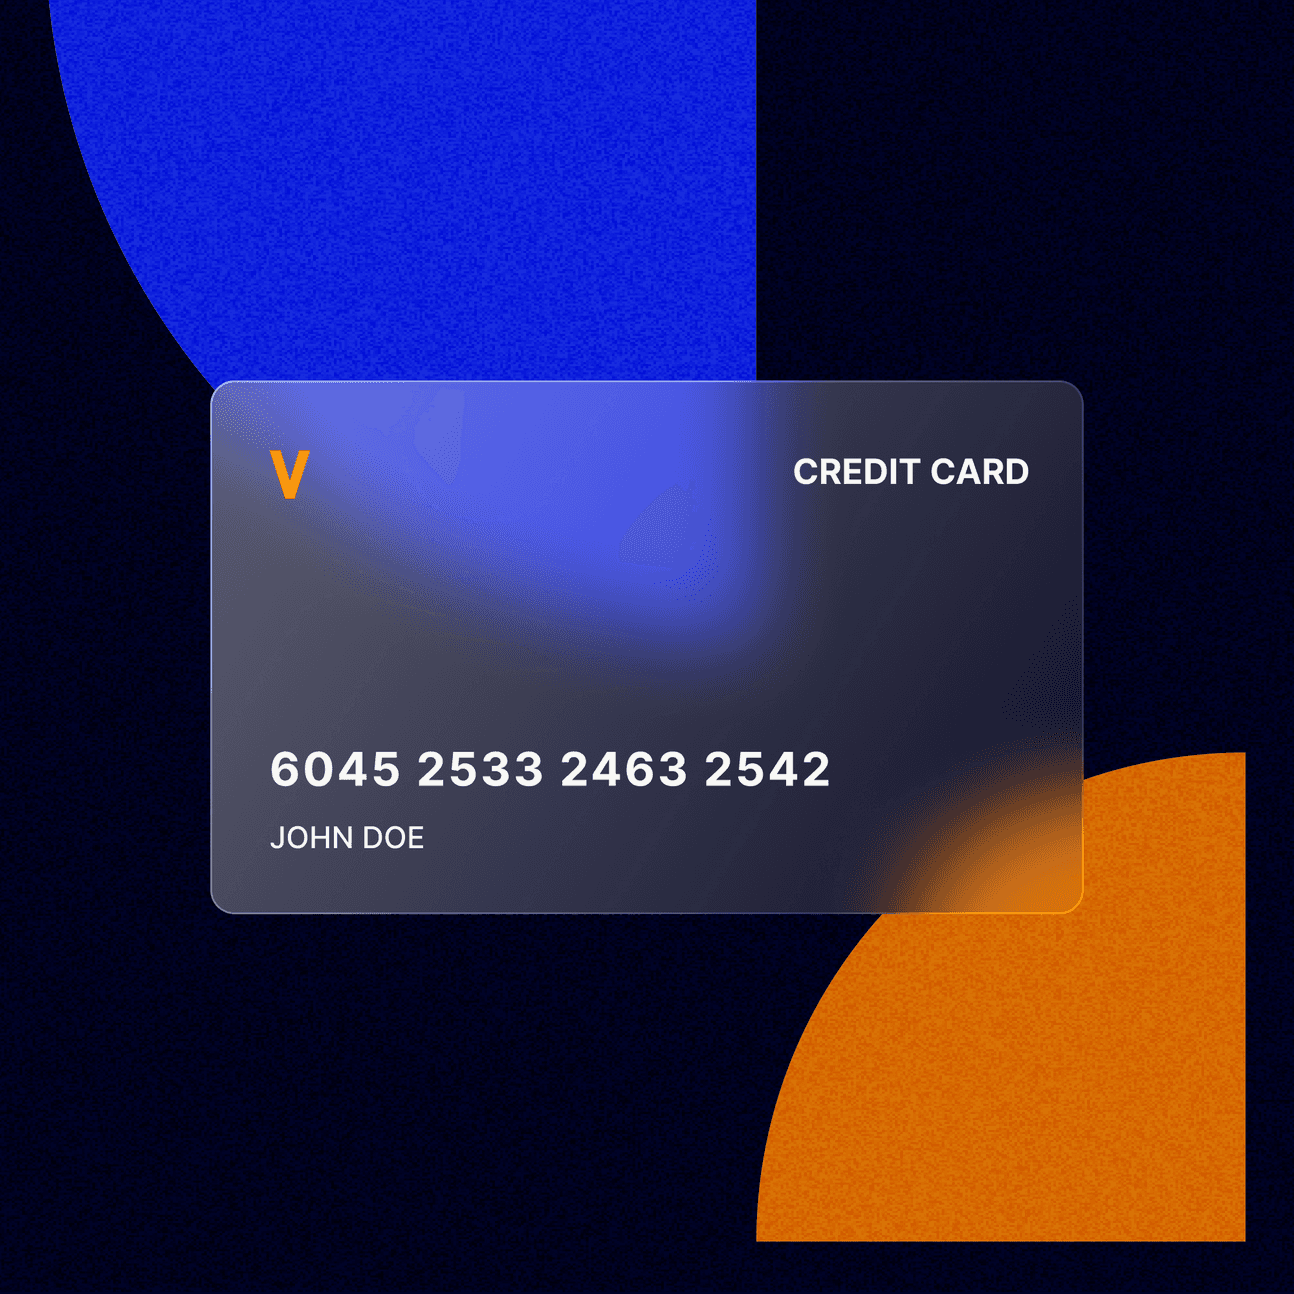 Virtual credit card on a black, orange, and blue background